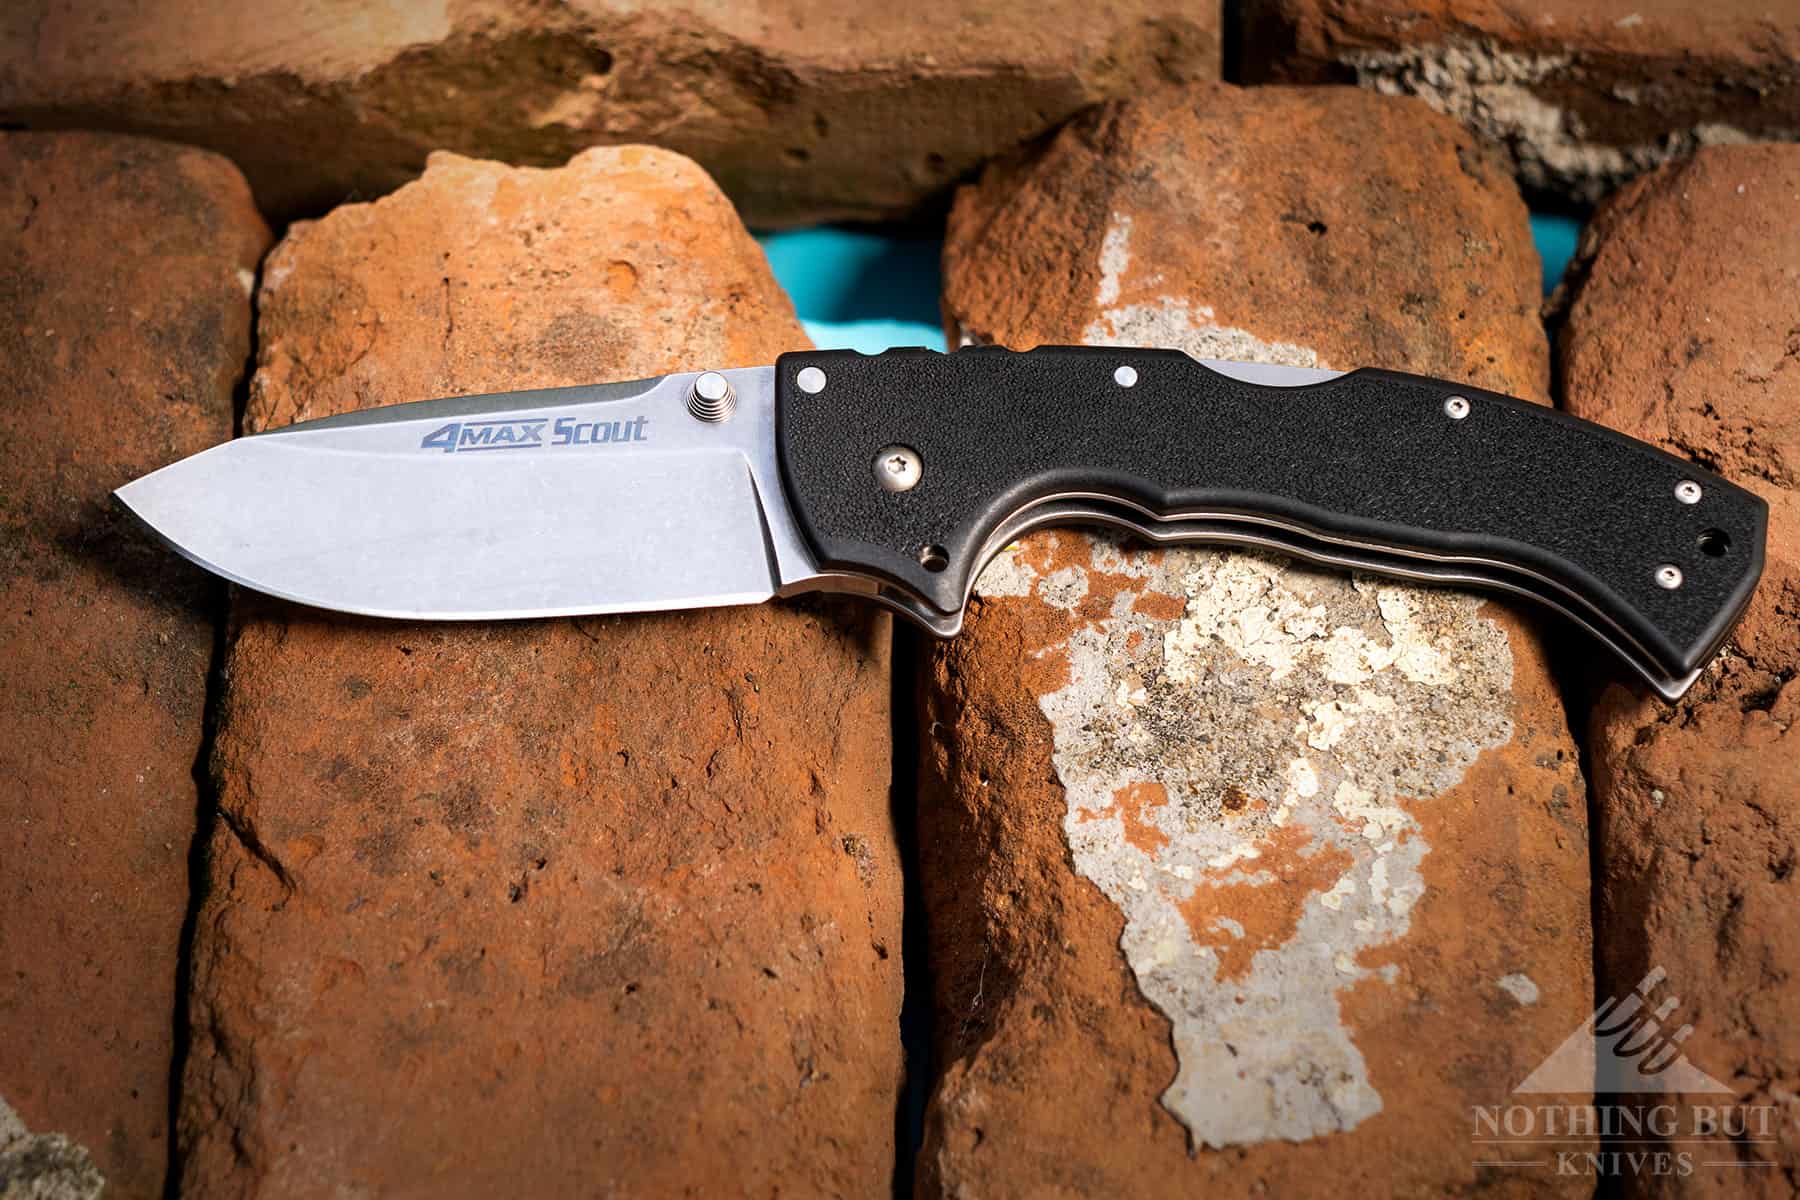 The Cold Steel 4 Mac Scout may be the ultimate hard use knife under $100, because it is tough, and it has a handle that is easy to grip when wearing work gloves.